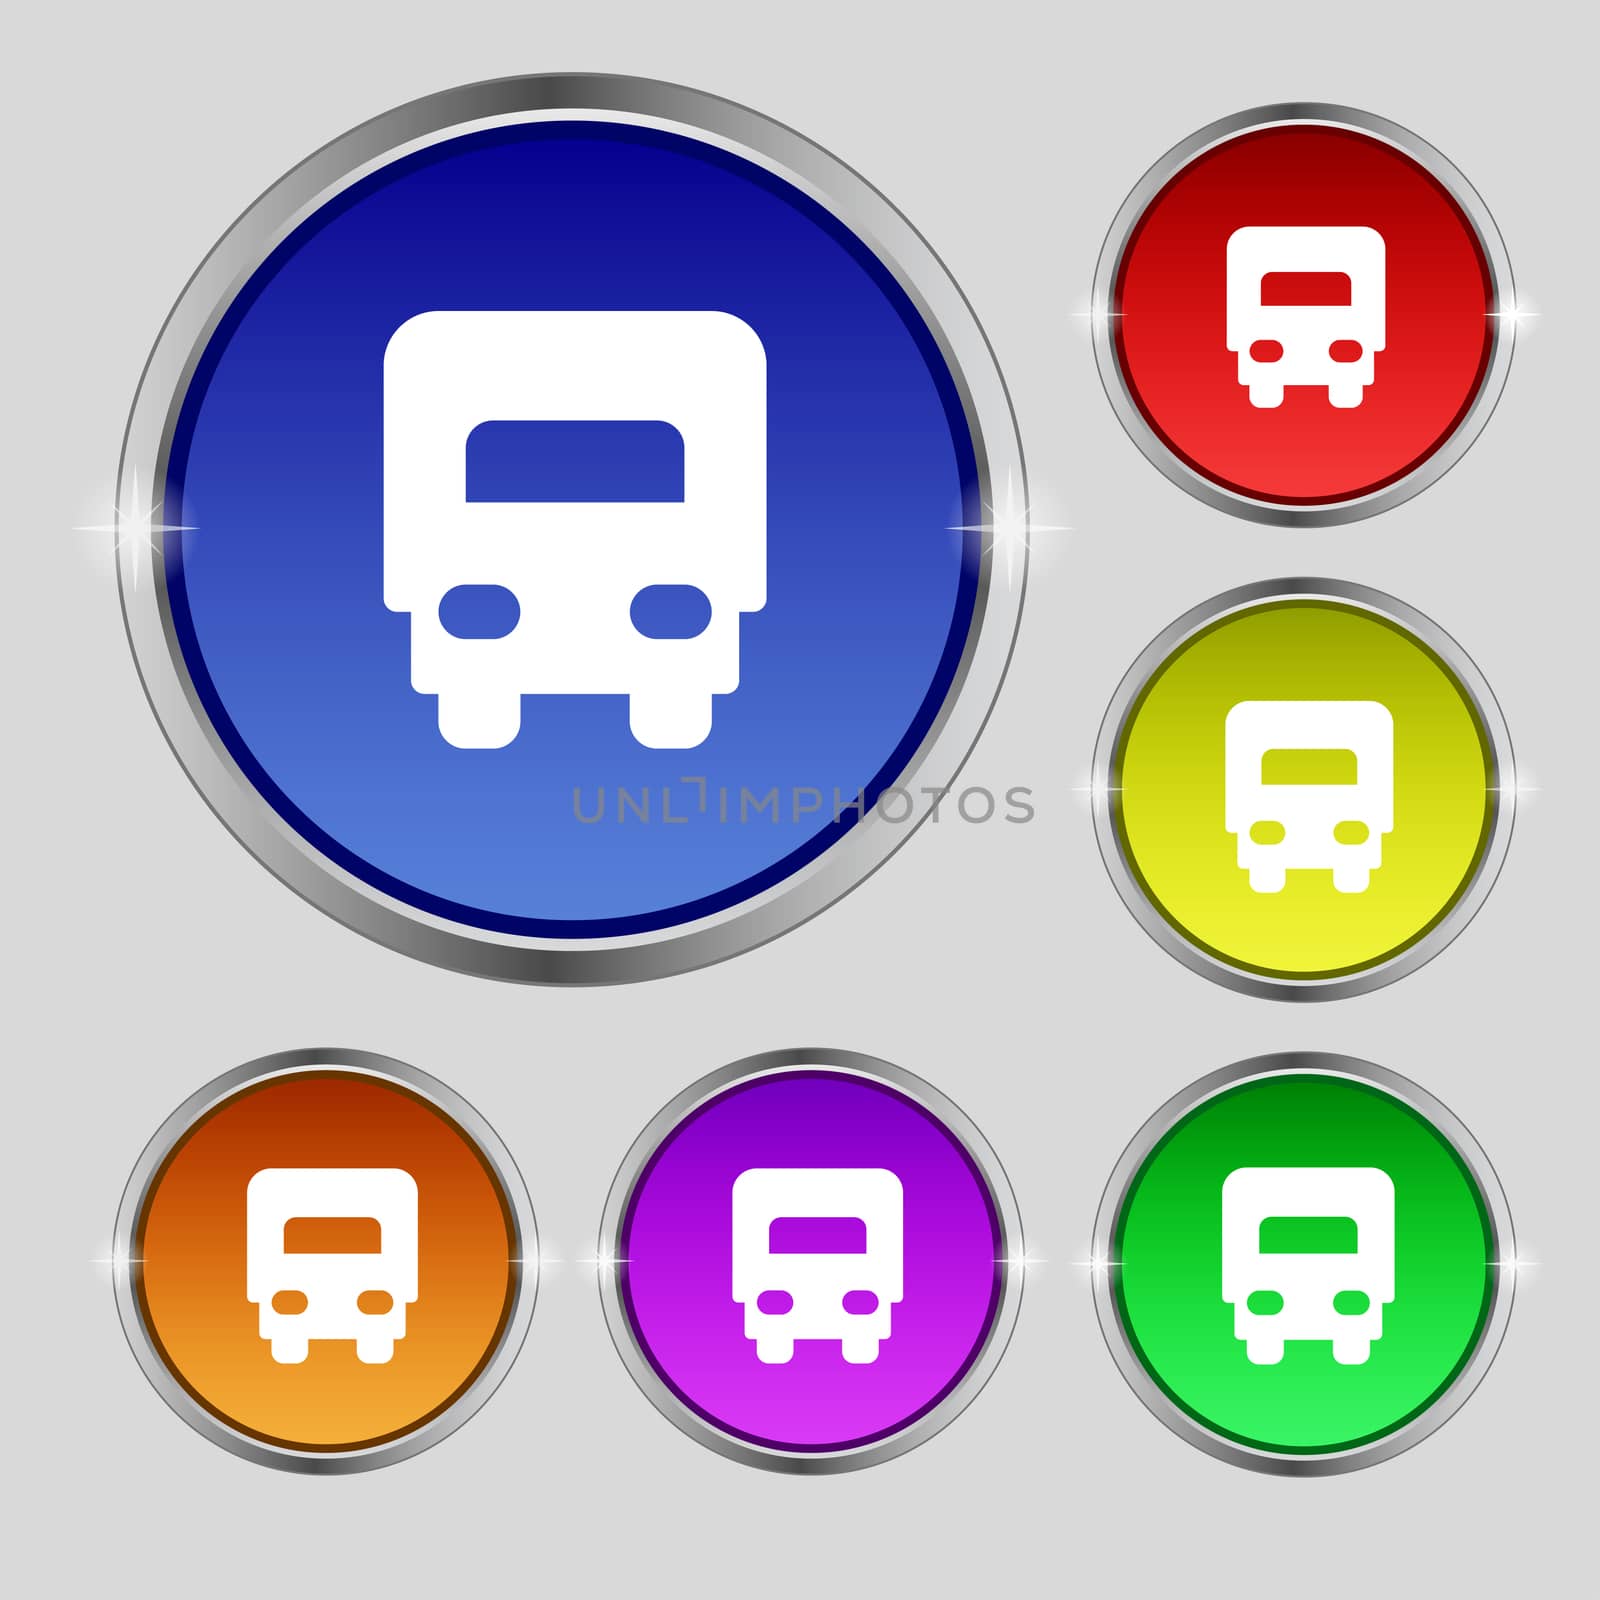 Delivery truck icon sign. Round symbol on bright colourful buttons. illustration